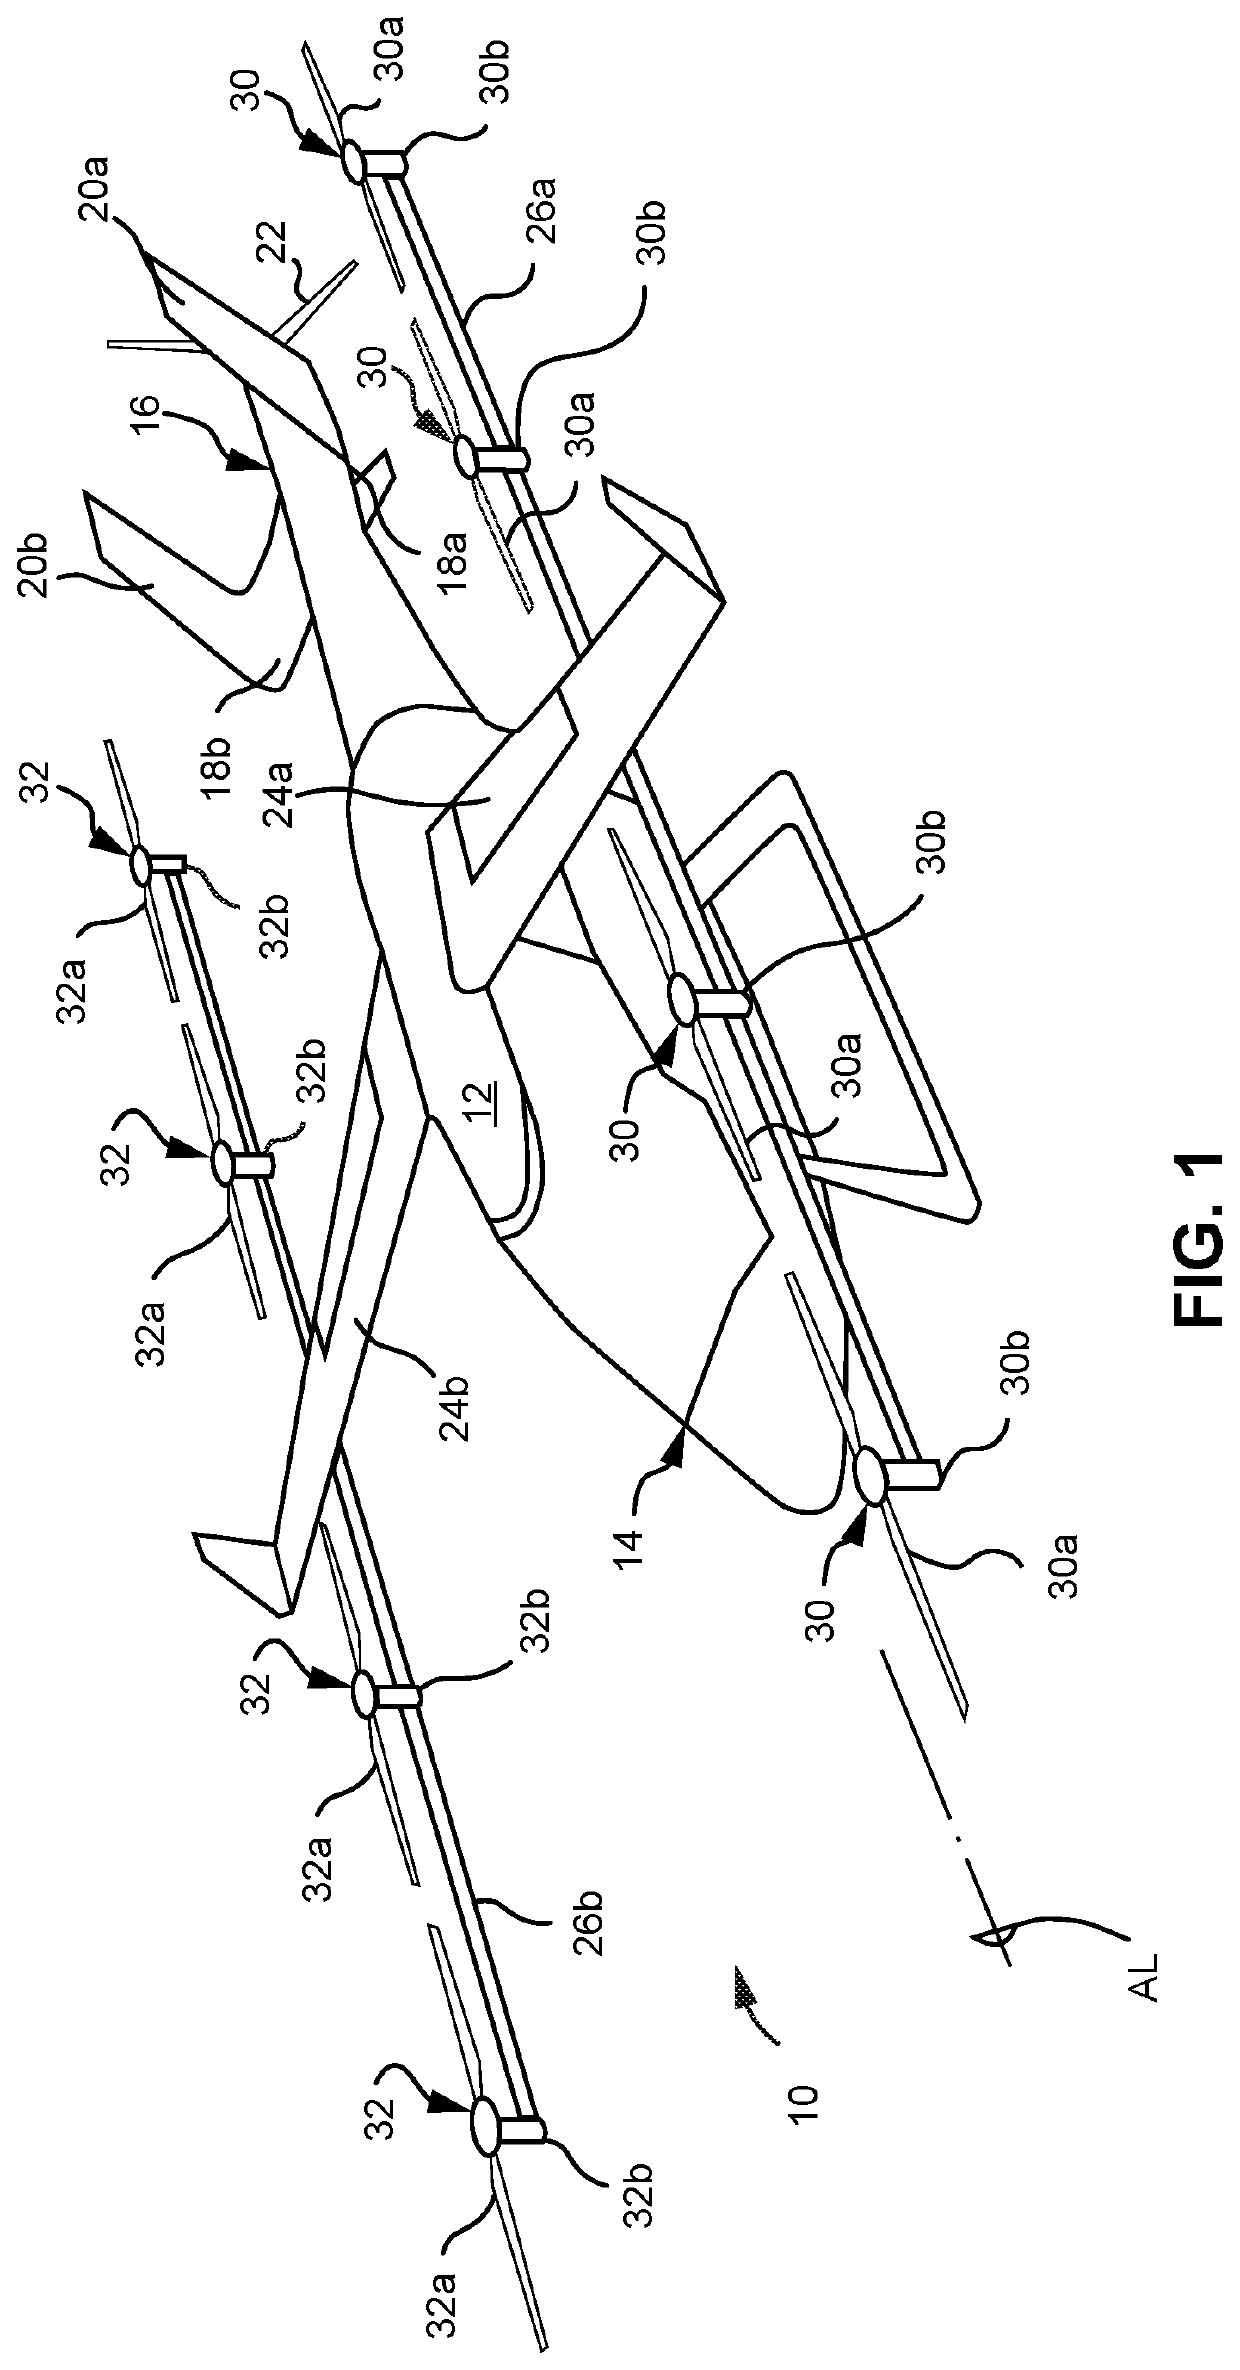 Vertical take-off and landing (VTOL) aircraft with cruise rotor positioning control for minimum drag